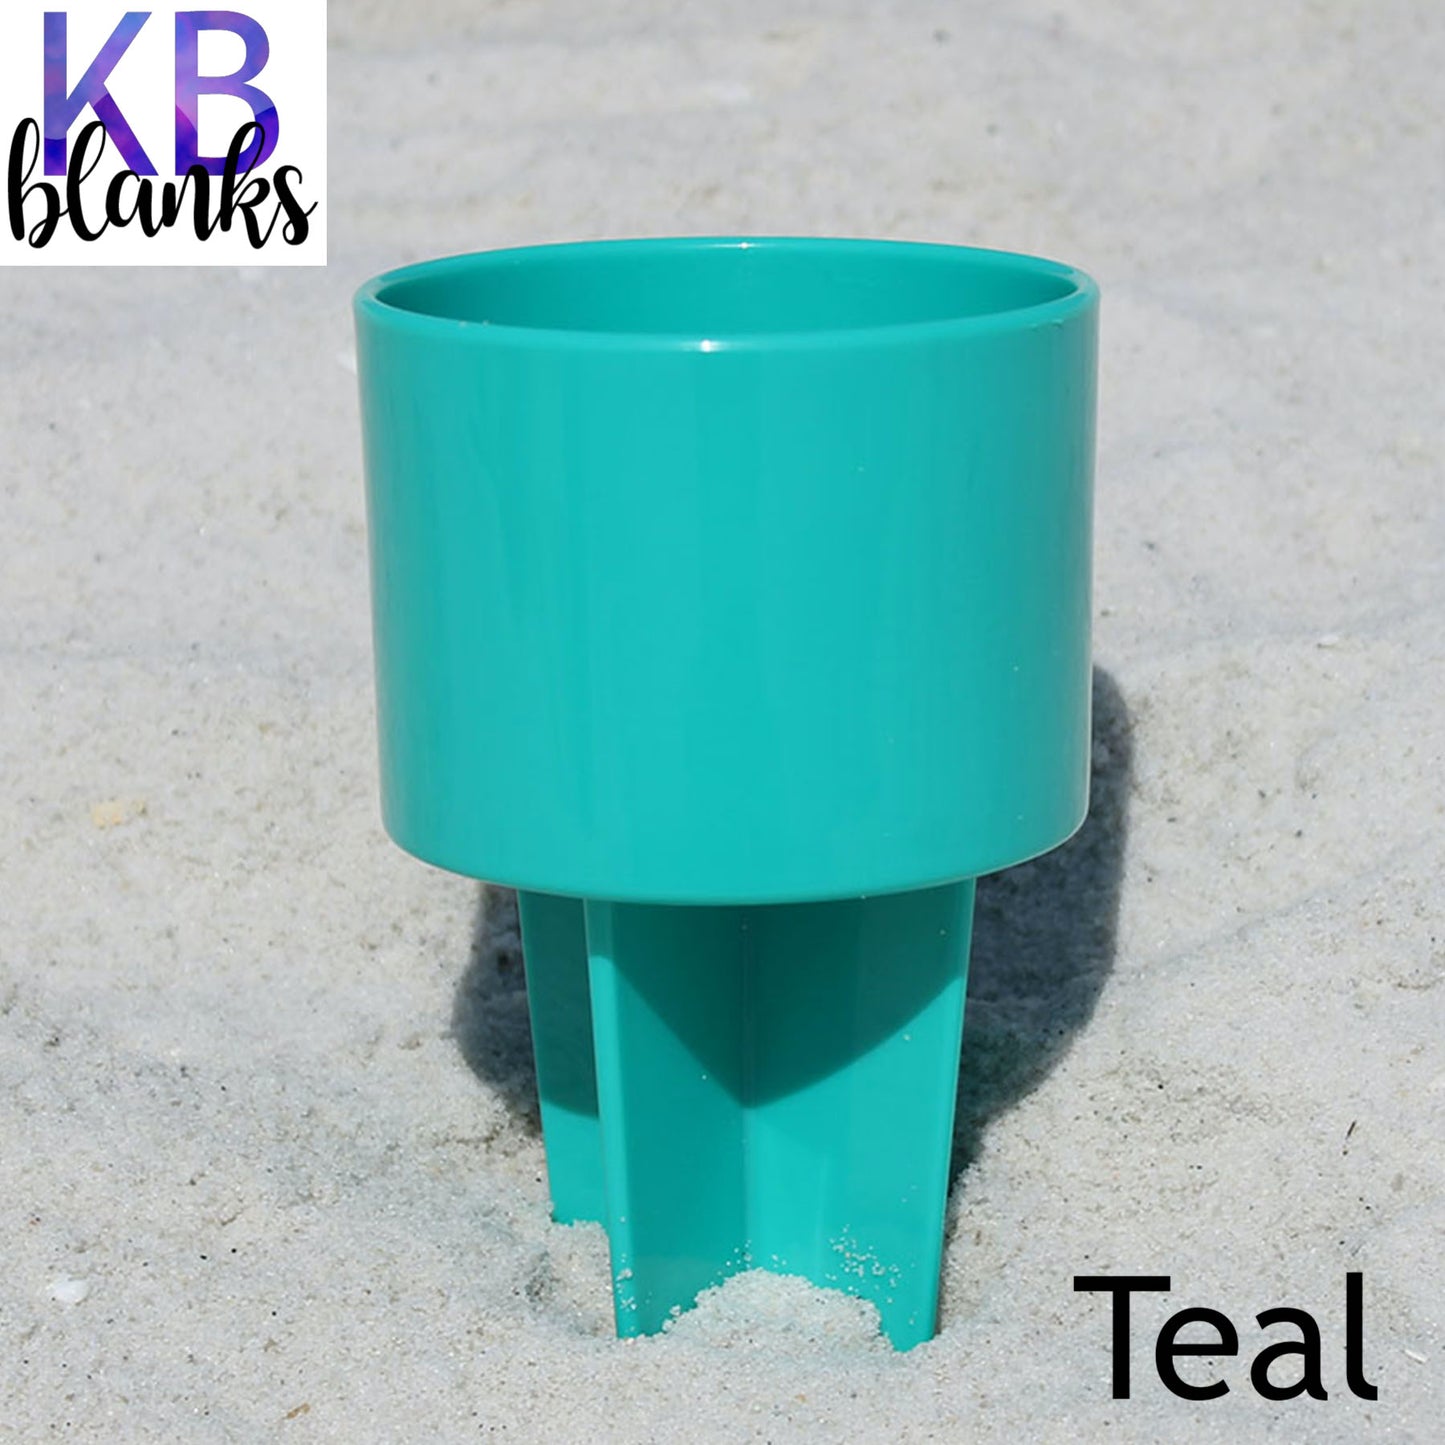 Spikers (Cup Holders For Beach)